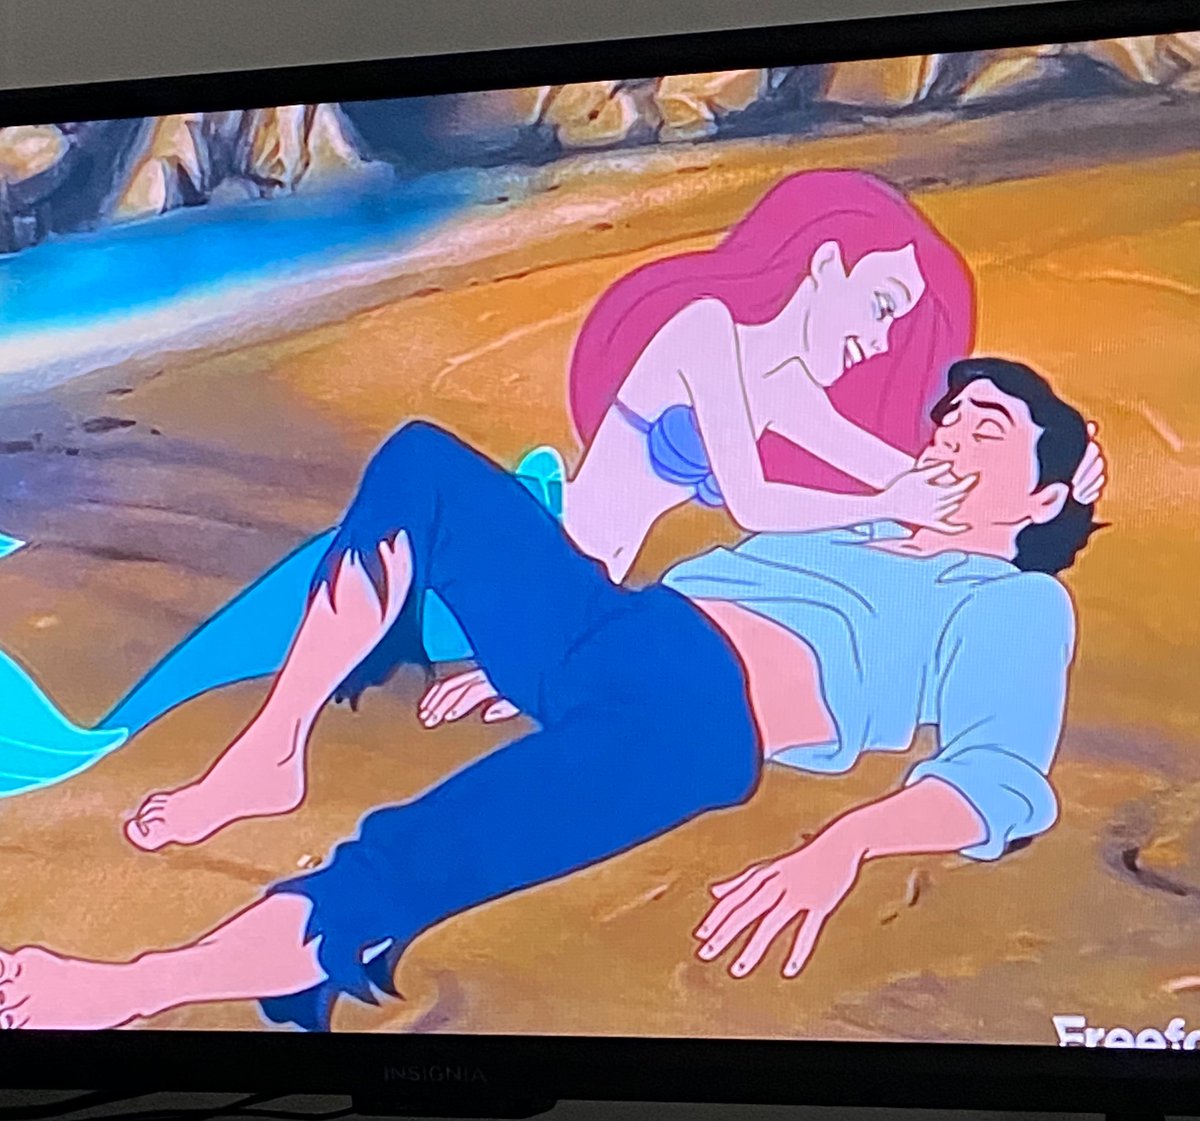 I’ve been sick for awhile and watching some Disney movies on tv is making me feel a lot better. It’s also bringing my inner child in me. 🤭 Takes me back to the childhood days back in the 90s. 

#thelittlemermaid #disneymovies #disneyfan